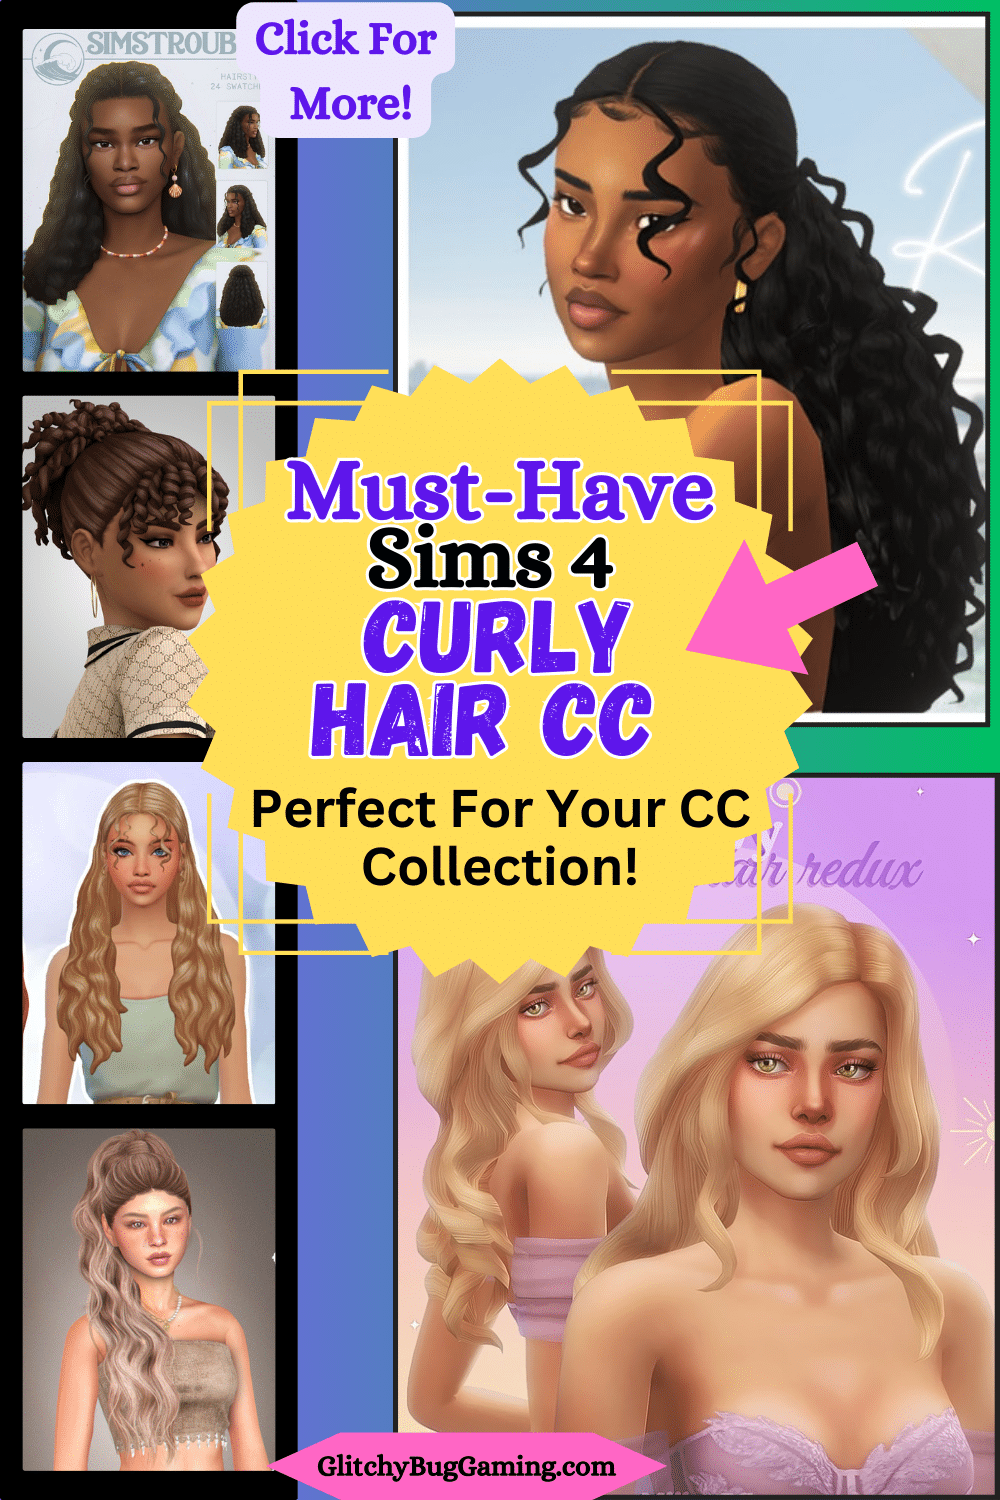 Sims 4 girls with different sims 4 curly hair cc